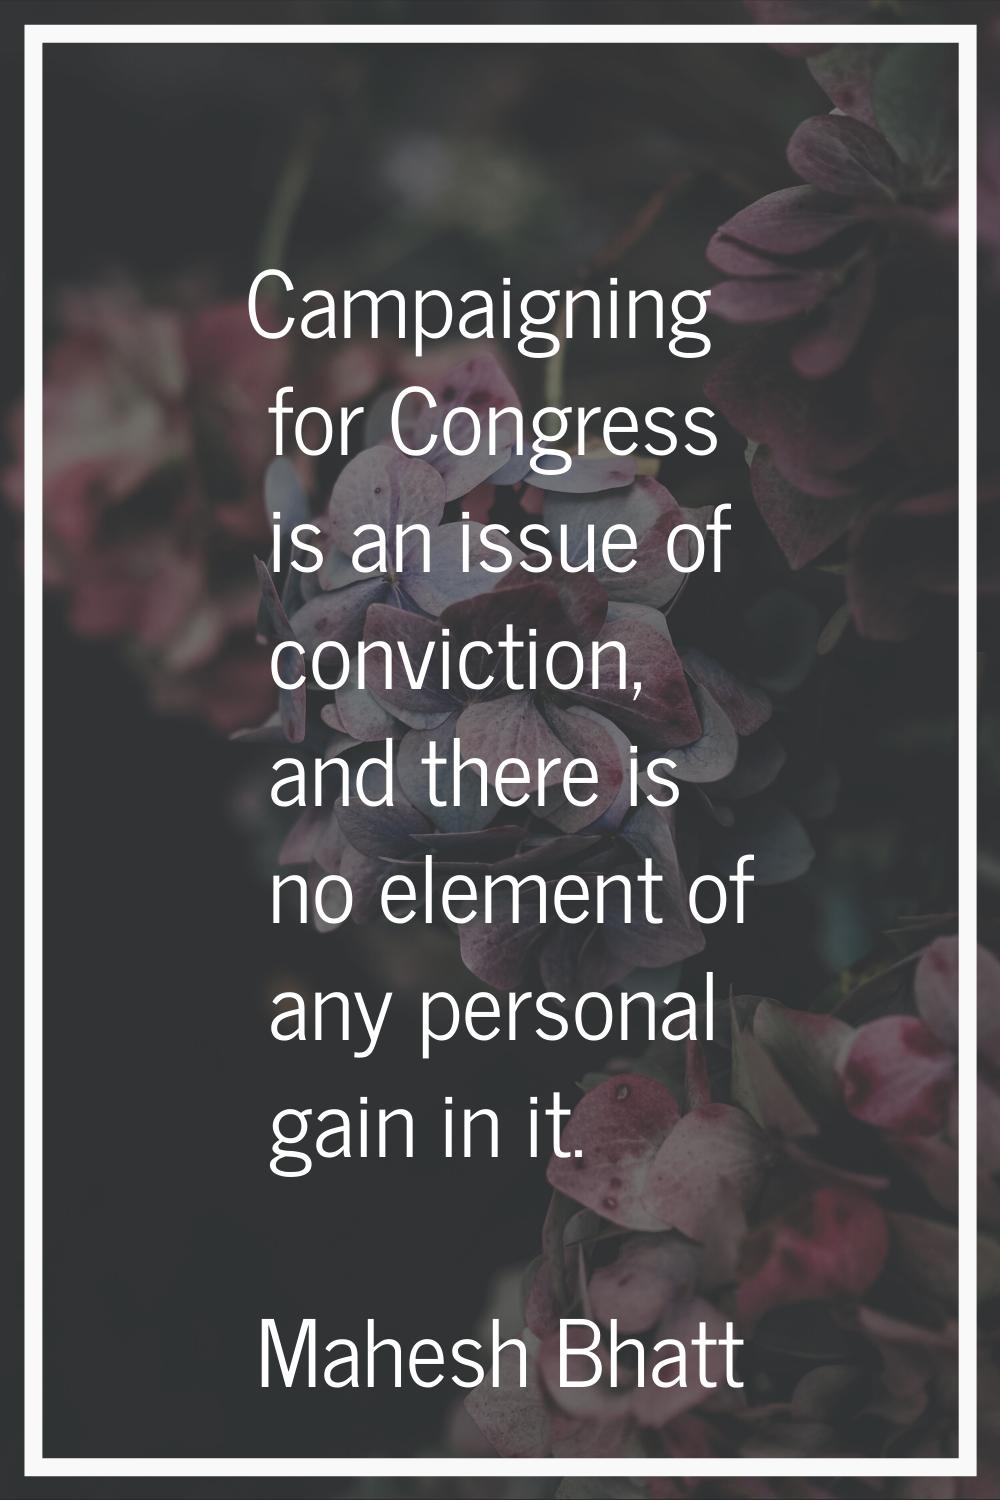 Campaigning for Congress is an issue of conviction, and there is no element of any personal gain in